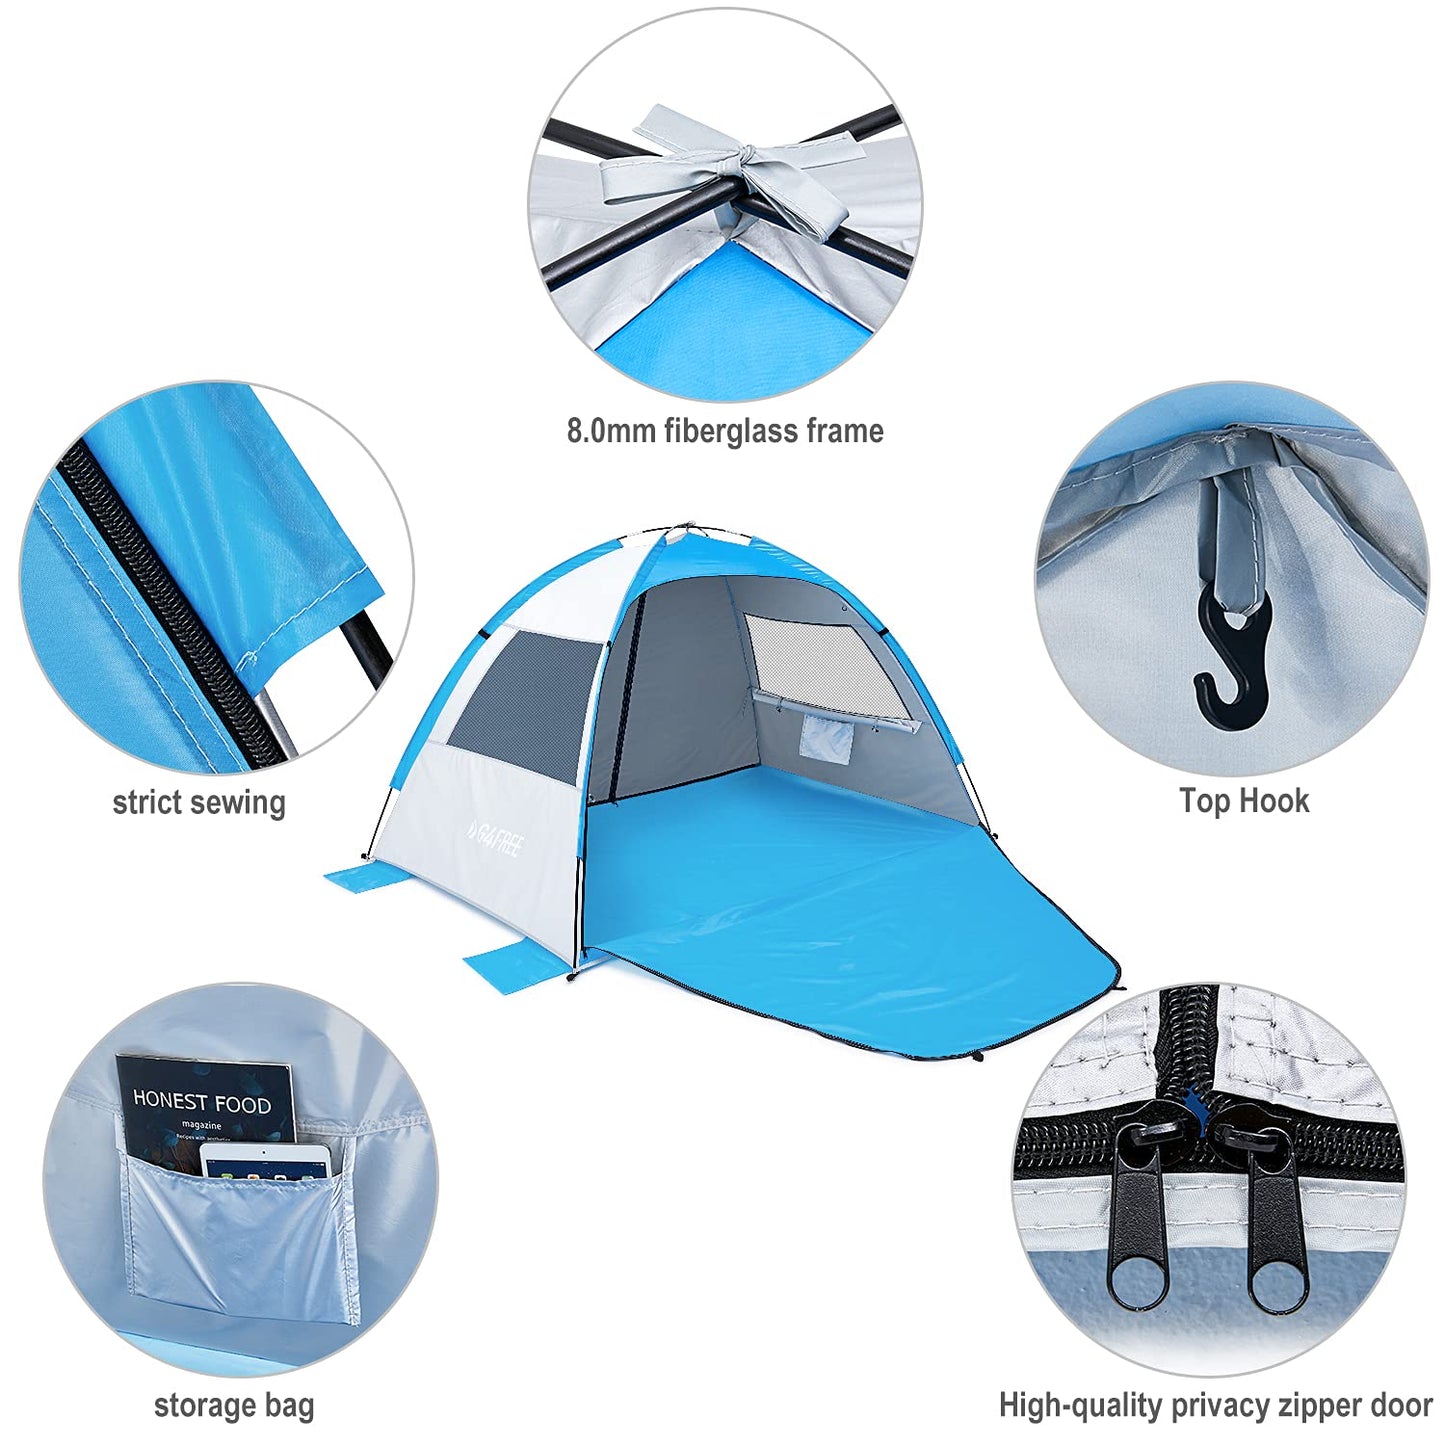 G4Free Large Pop up Beach Tent for 3-4 Person